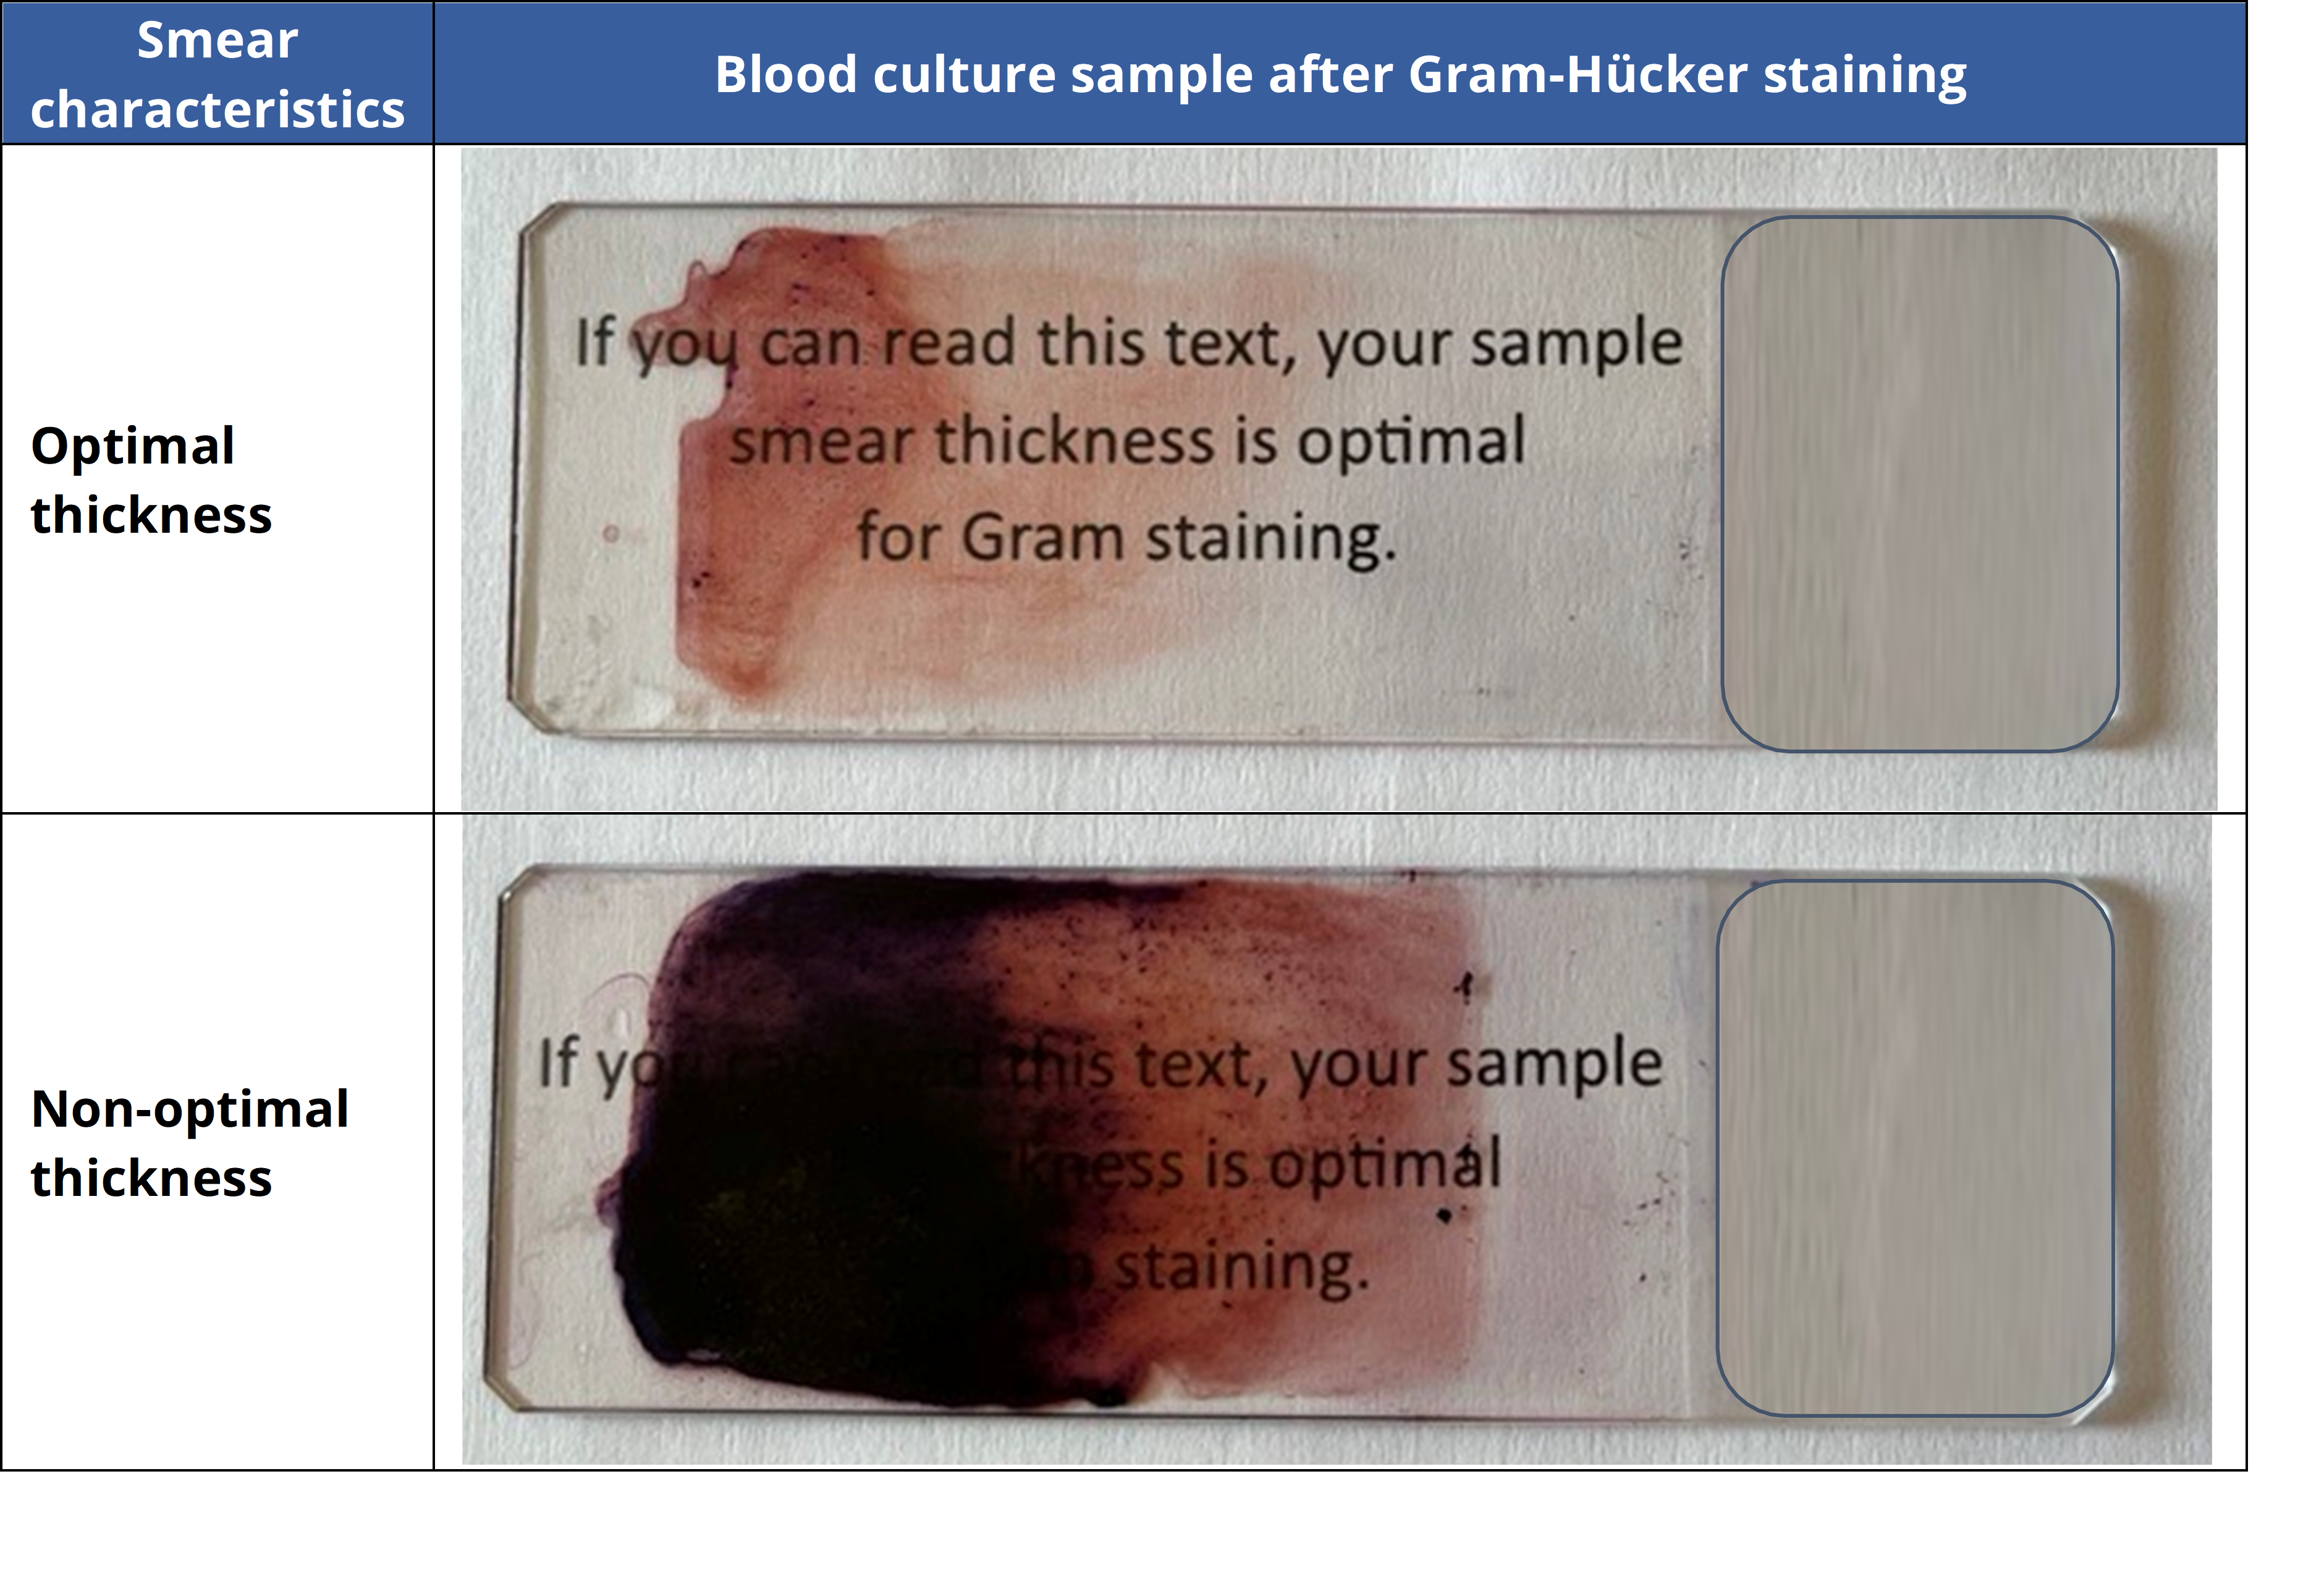 Blood culture sample after Gram-Hücker staining: optimal and non-optimal thickness